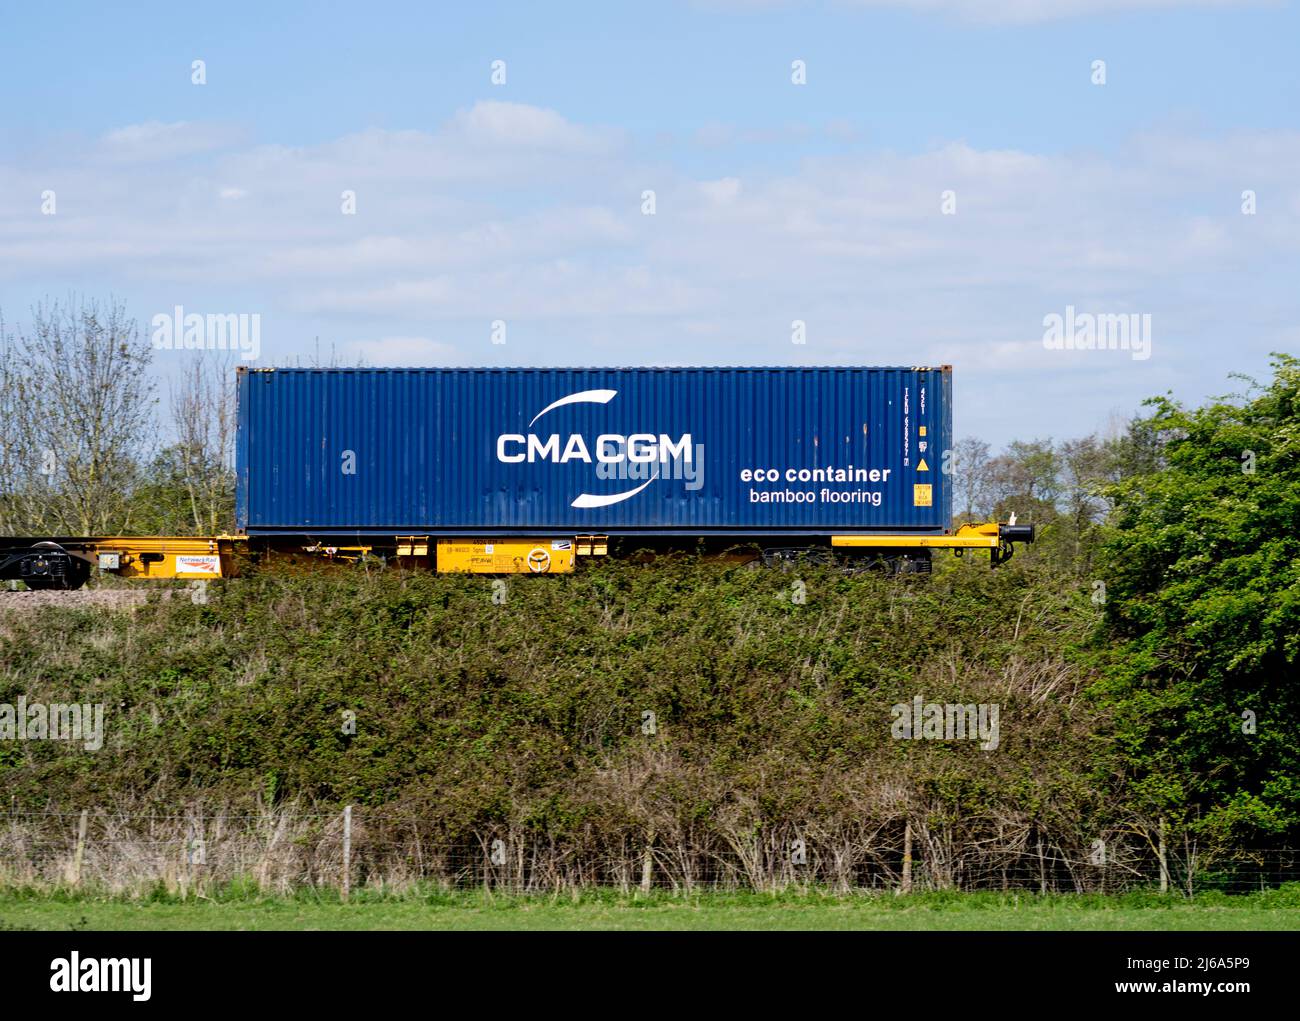 CMA CGM eco container with bamboo flooring, on a freightliner train, Warwickshire, UK Stock Photo